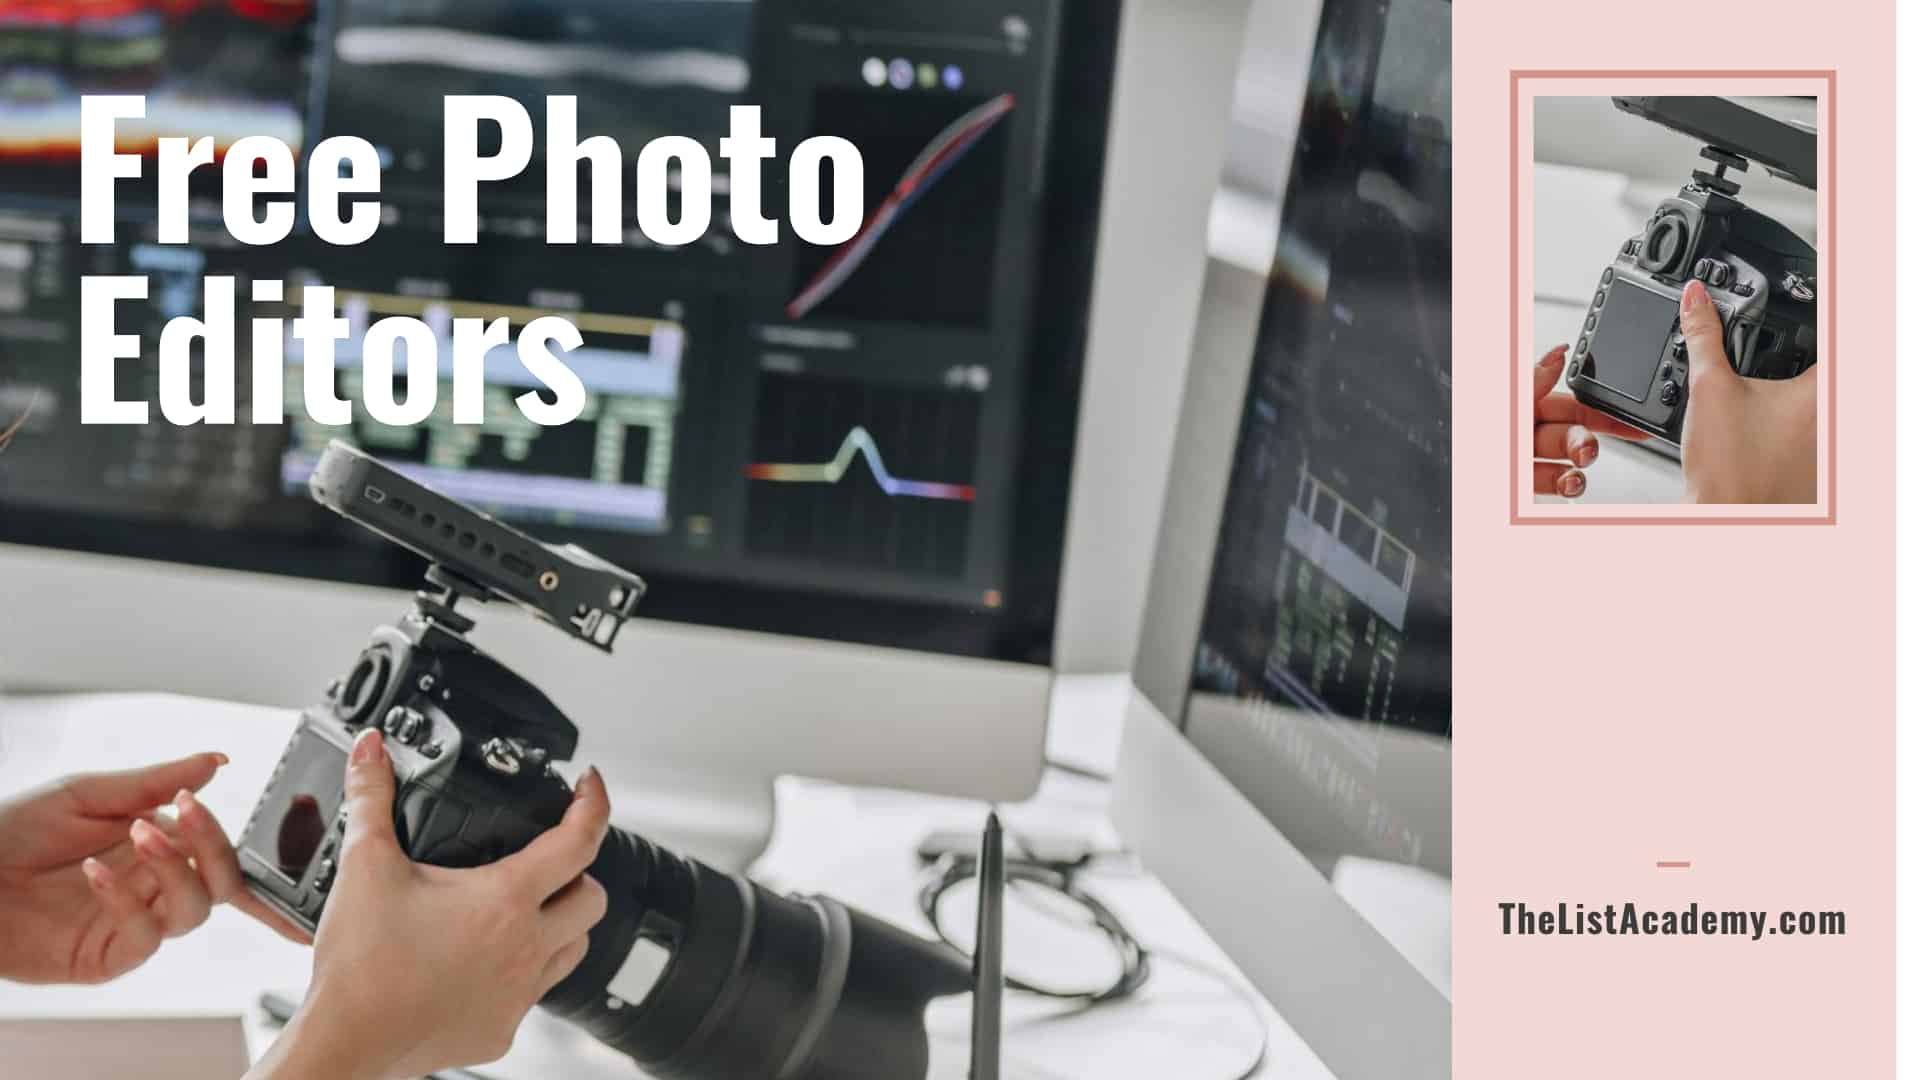 Cover Image For List : Best 28 Free Photo Editors